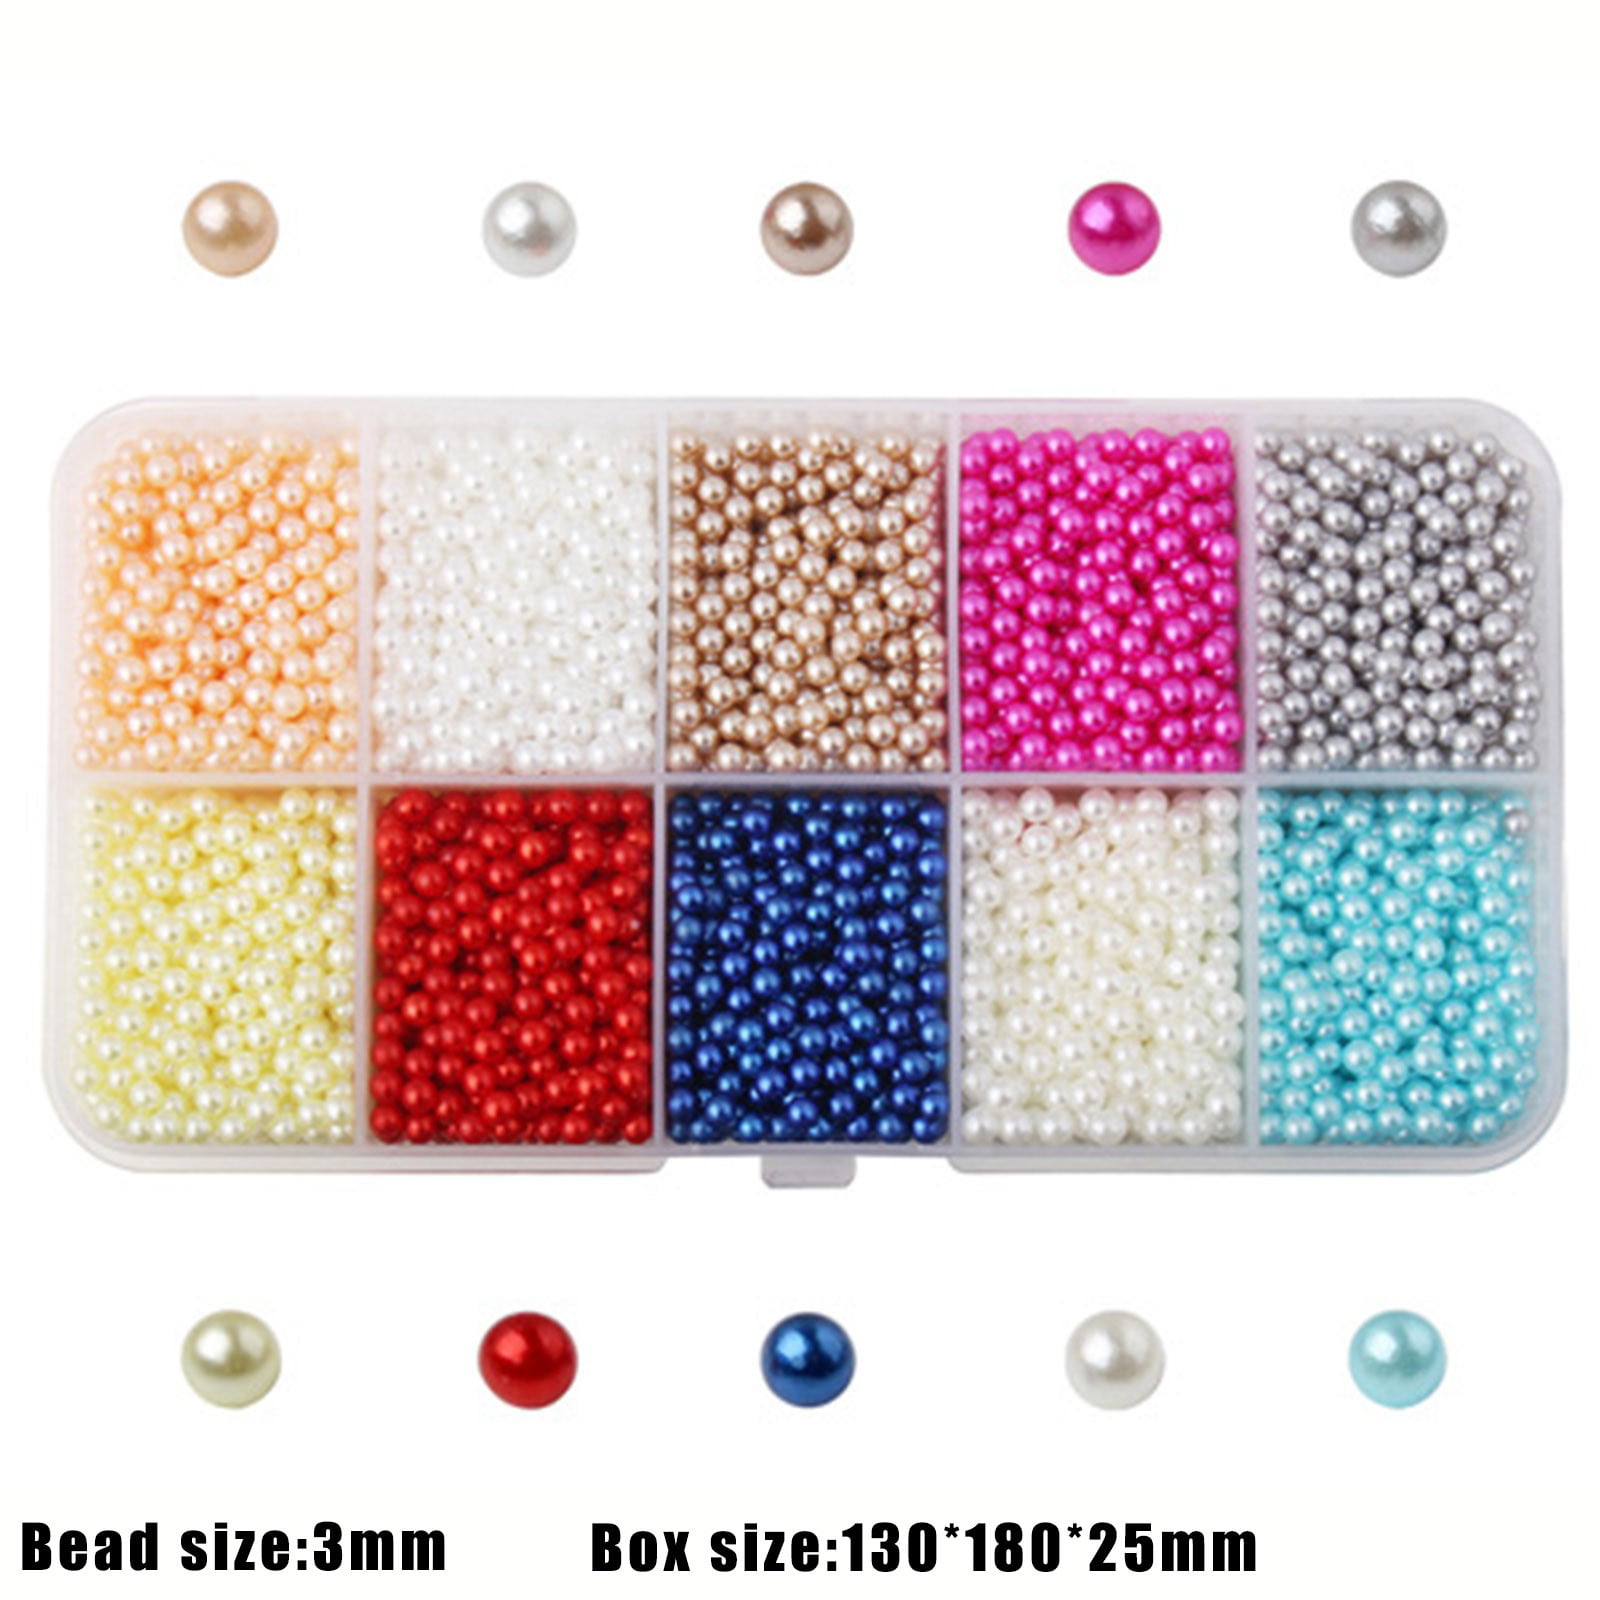 Round Pearls for Crafts Mix Size-Multi Color Acrylic Round Loose  Beads-Imitation Pearl Beads-Round Pearl Bead no Hole for Decor-Acrylic  Loose